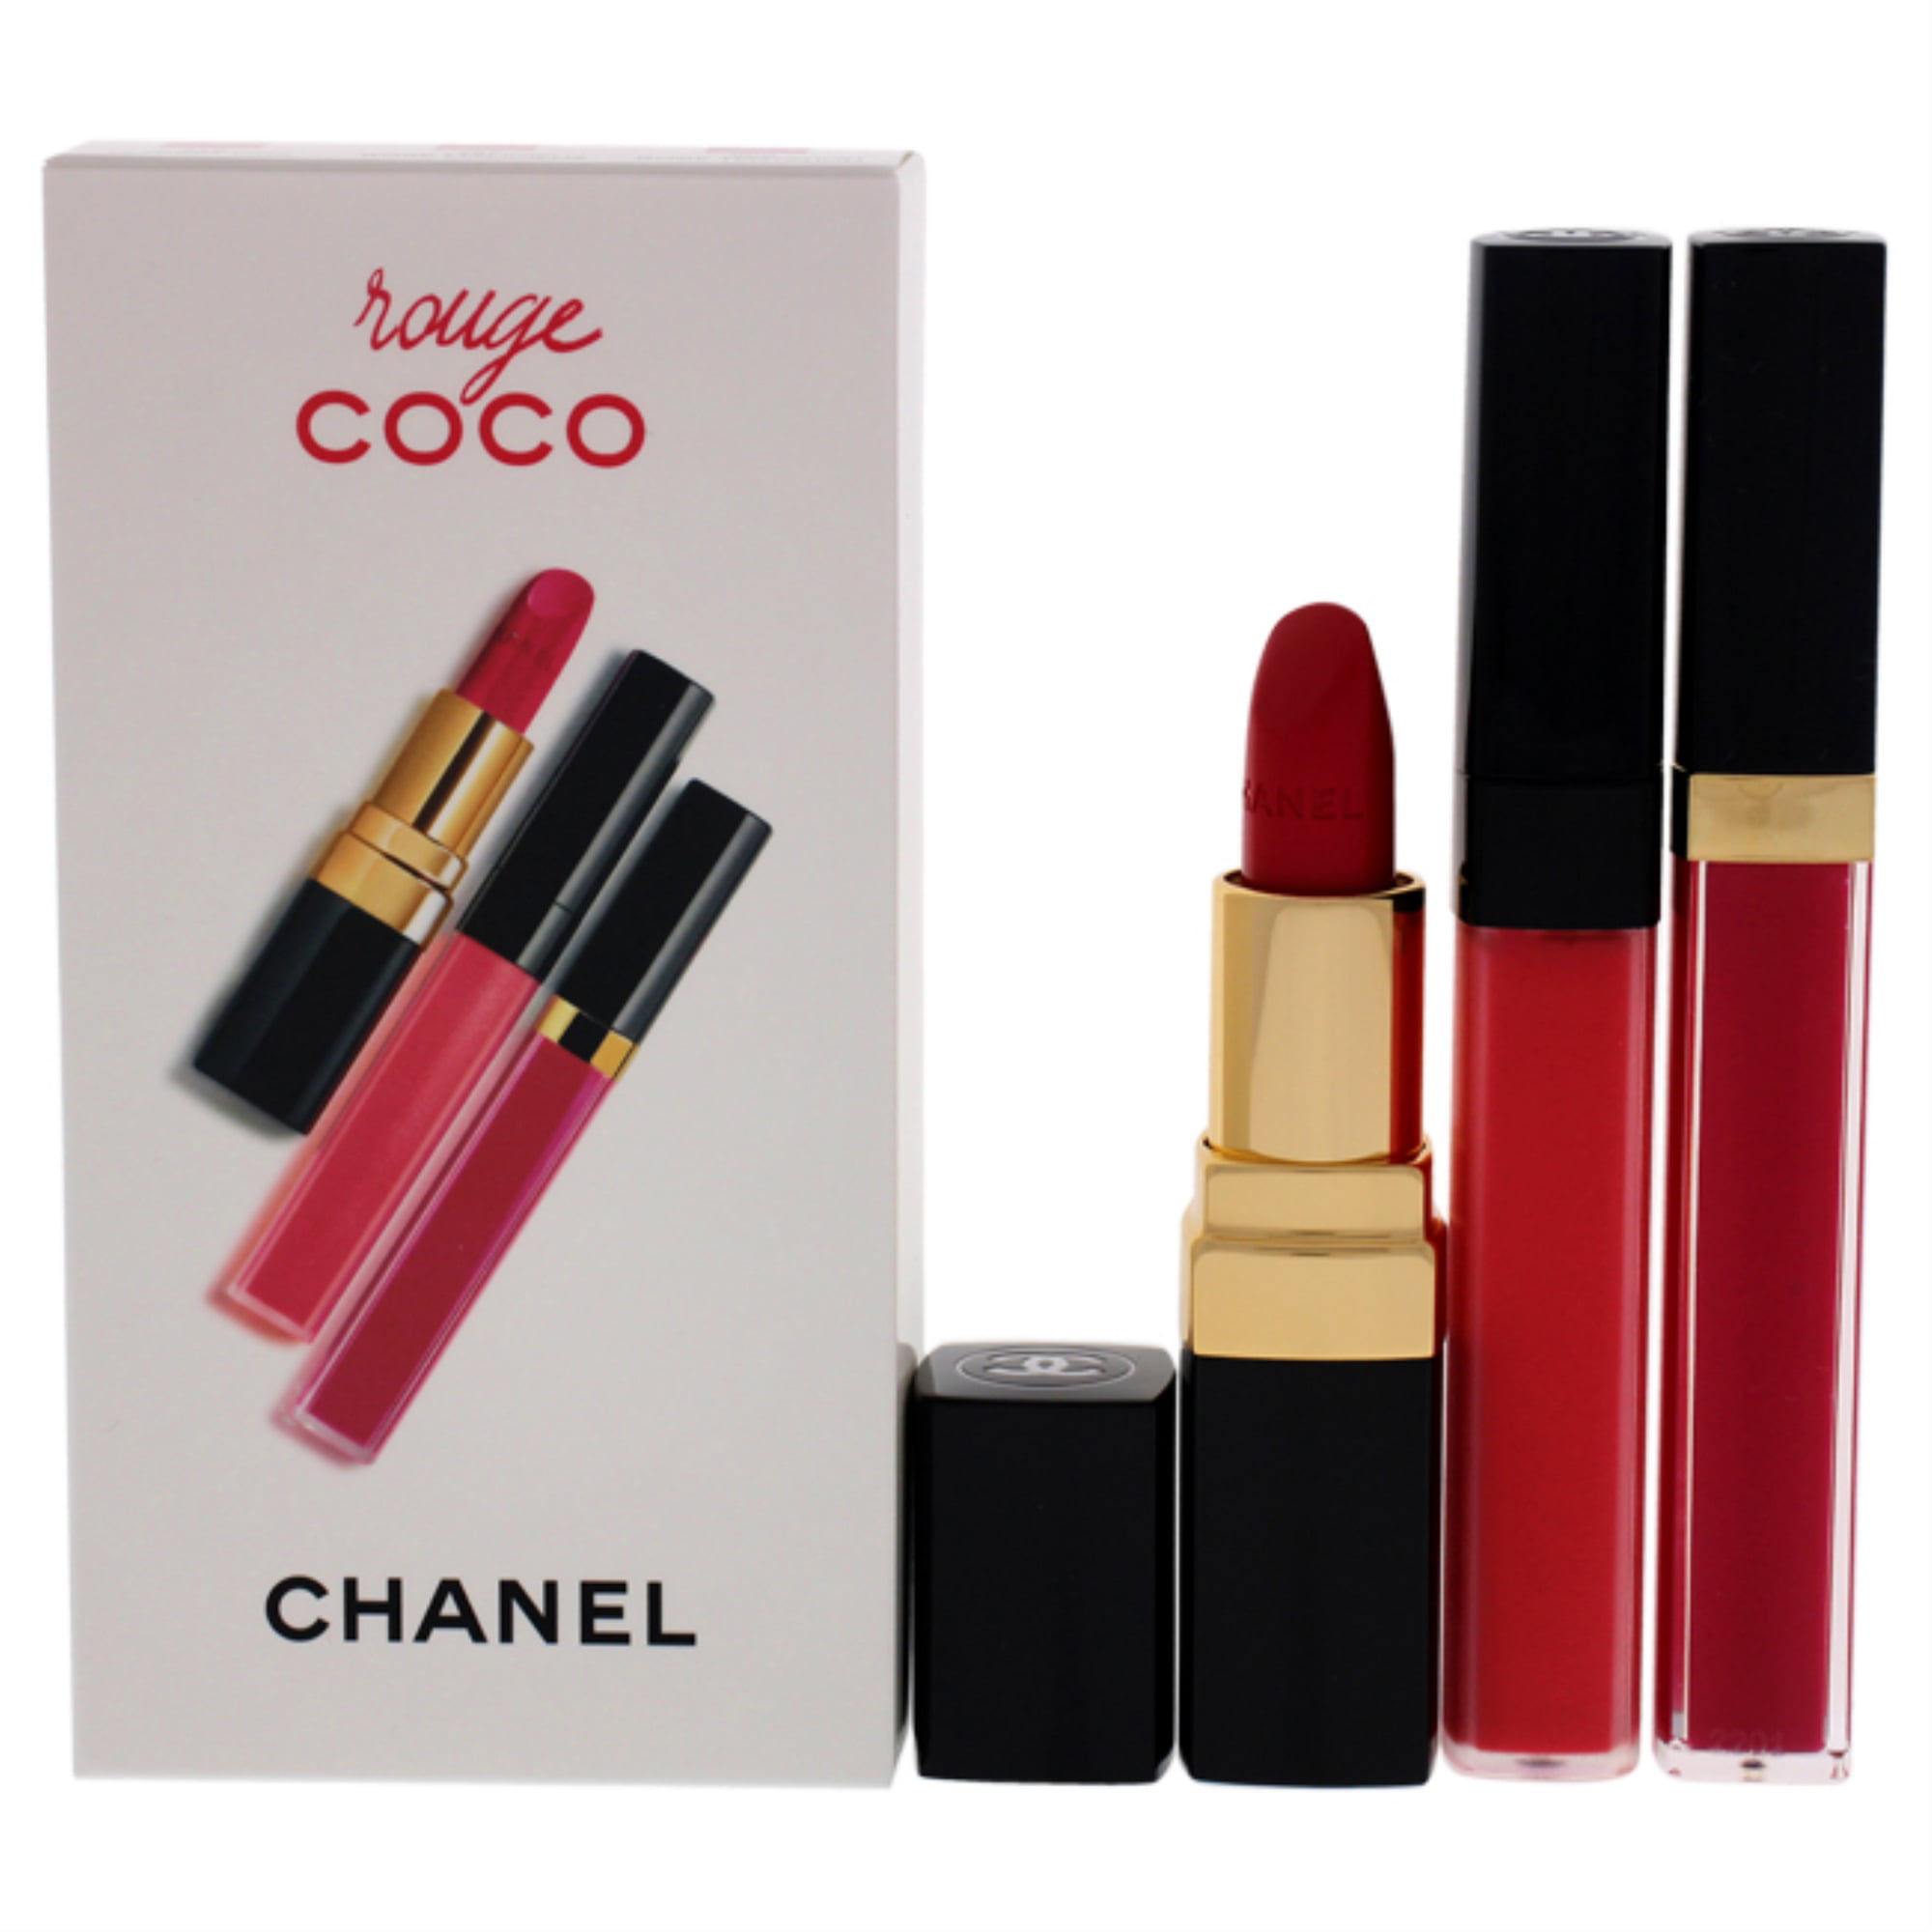 Rouge Coco Set by Chanel for Women - 3 Pc Set 0.19oz Lip Blush - 416  Teasing Pink, 0.12oz Ultra Hydrating Lip Color - 482 Rose Malicieux, 0.19oz